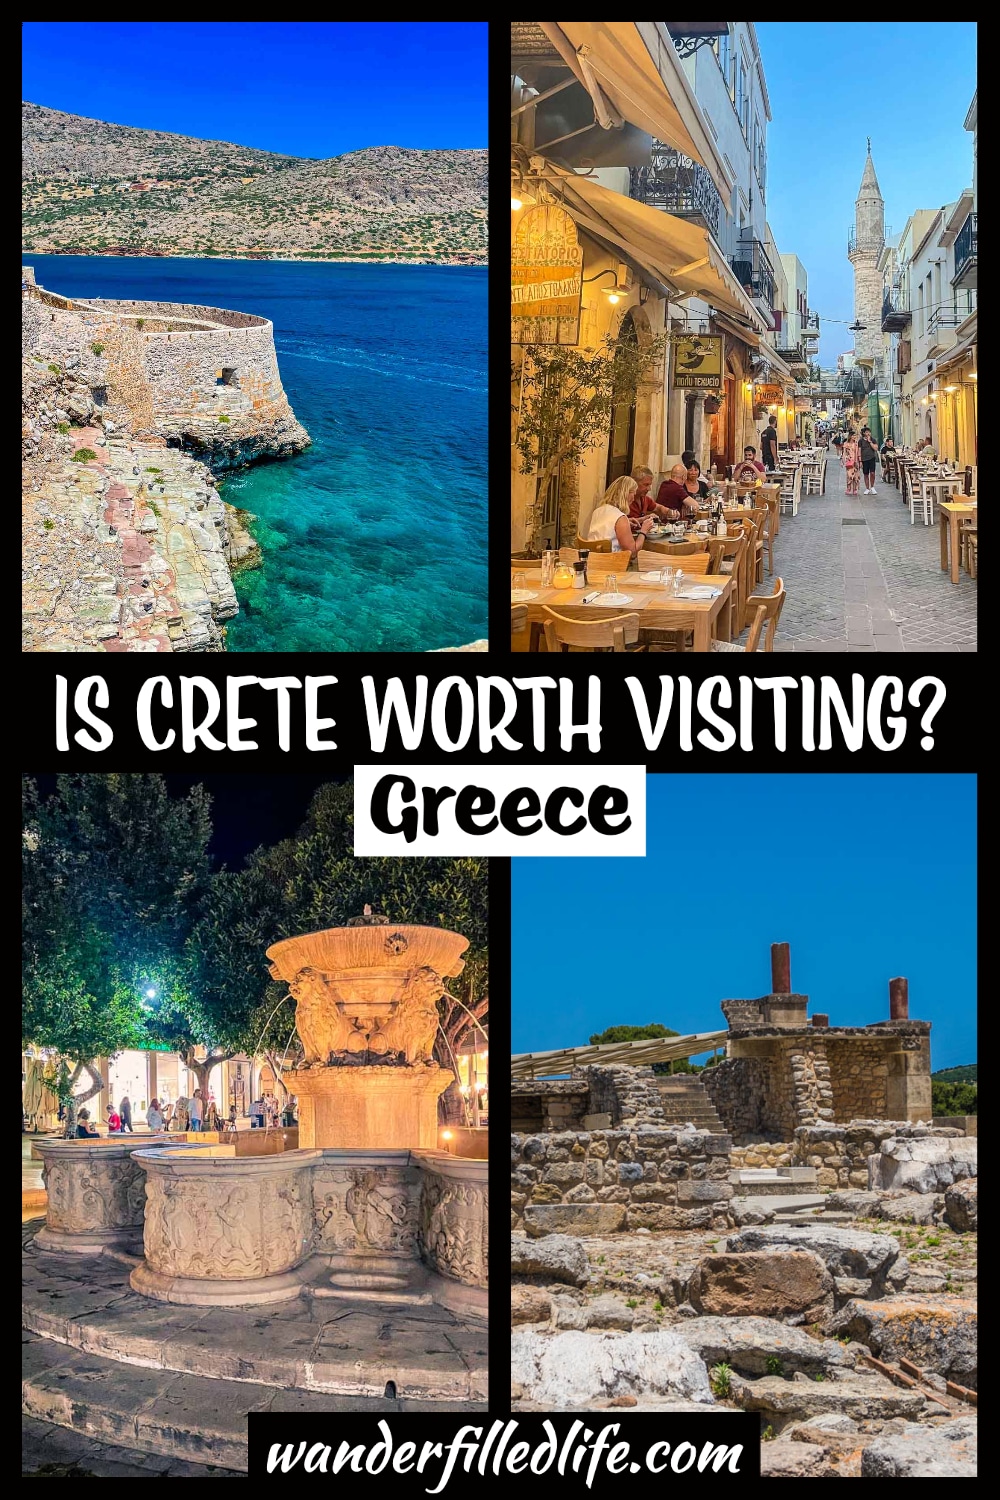 Many travelers to Greece ask: "Is Crete worth visiting?" Well, in three short days, we found Crete to be both picturesque and a lot of fun!